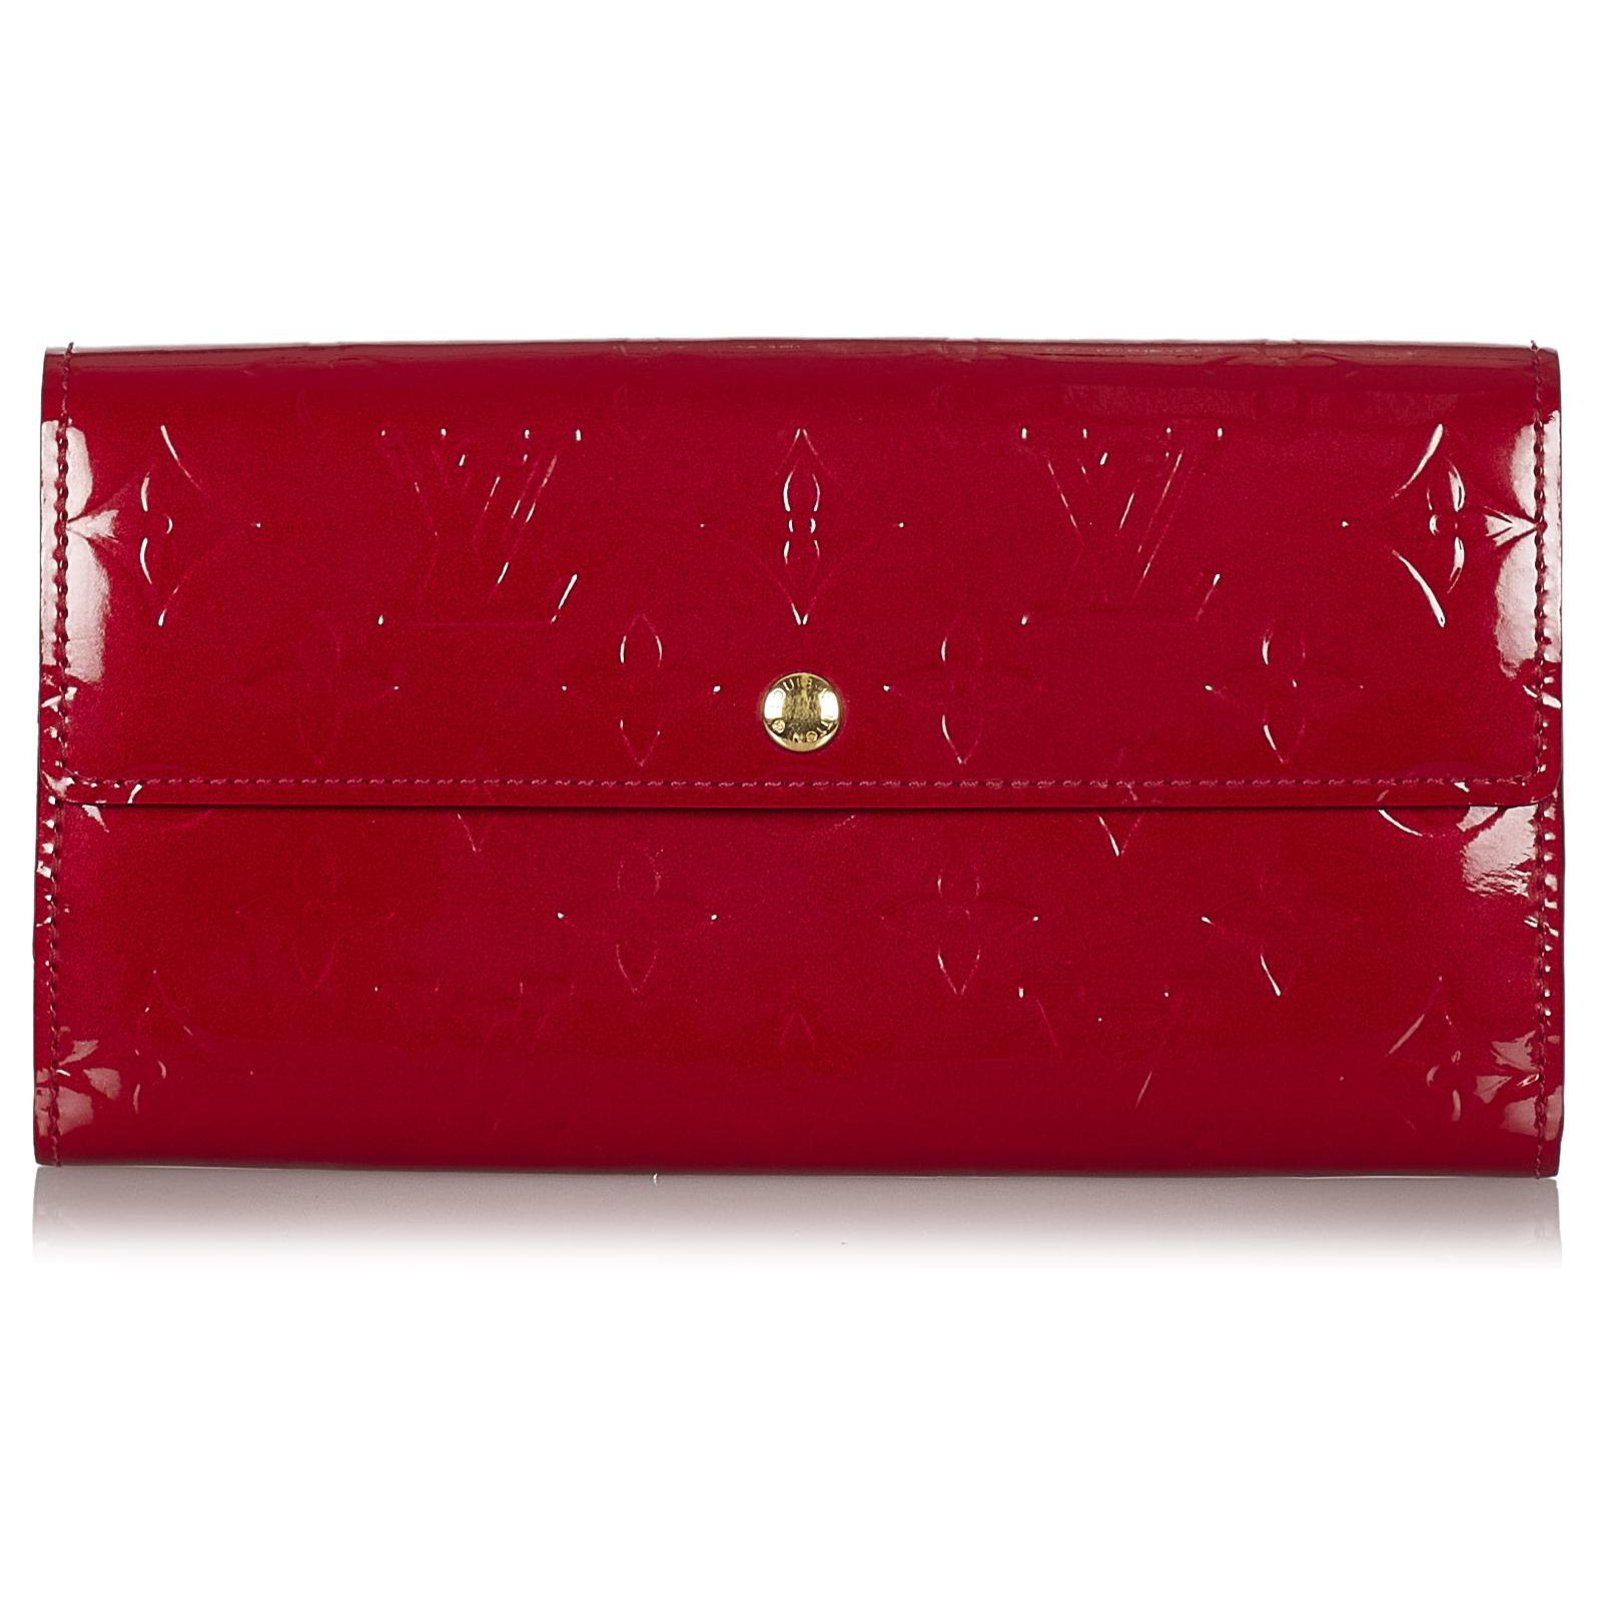 Louis Vuitton Red Vernis Sarah Wallet Leather Patent leather ref